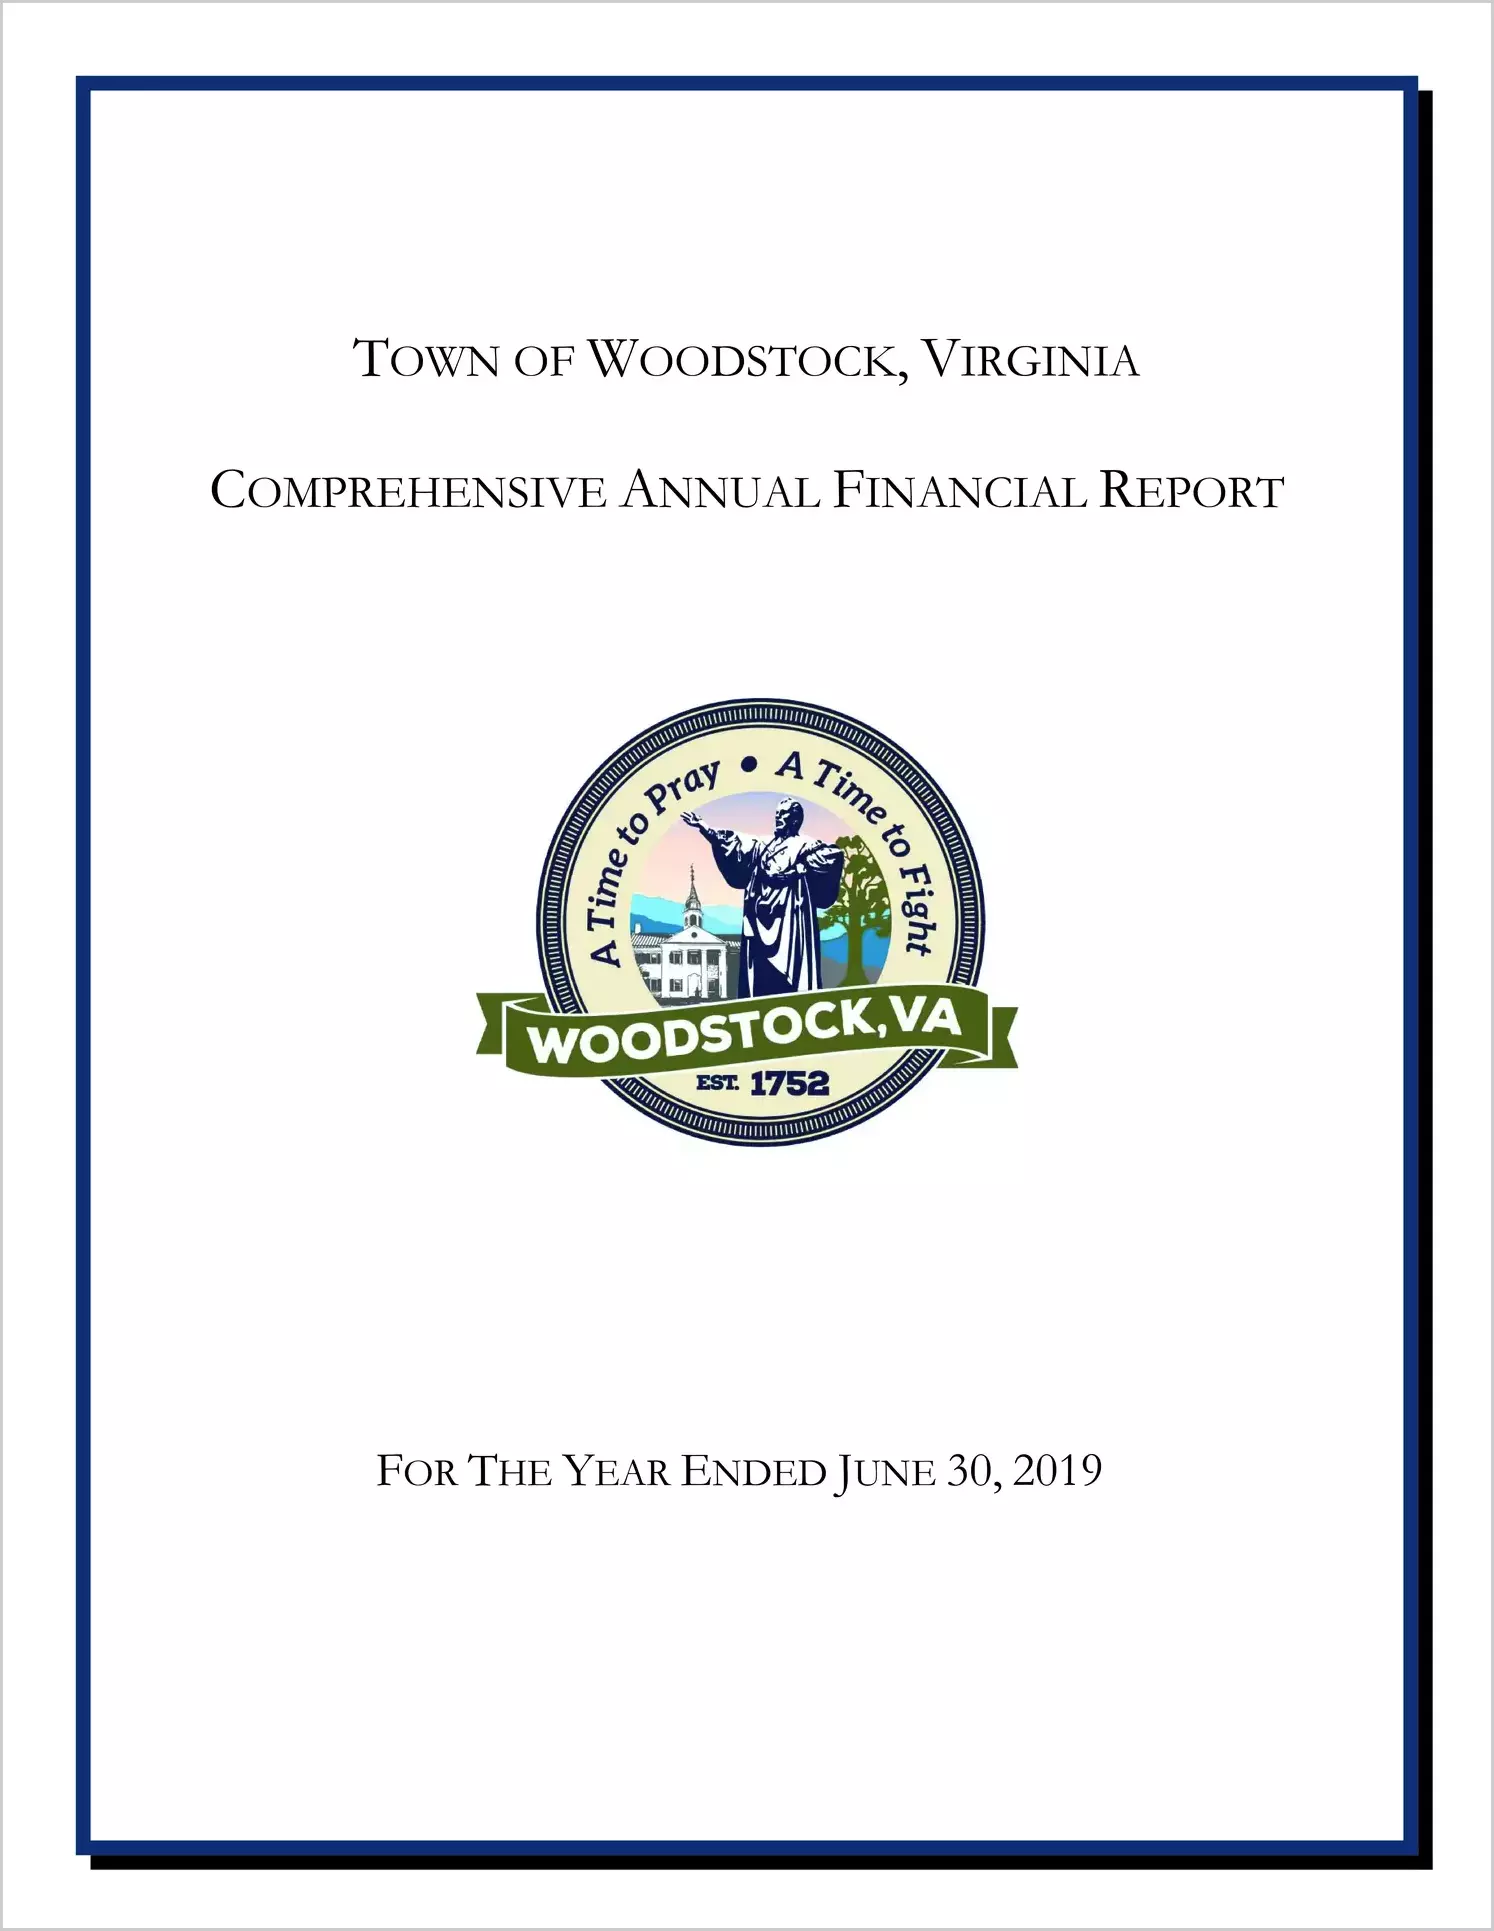 2019 Annual Financial Report for Town of Woodstock